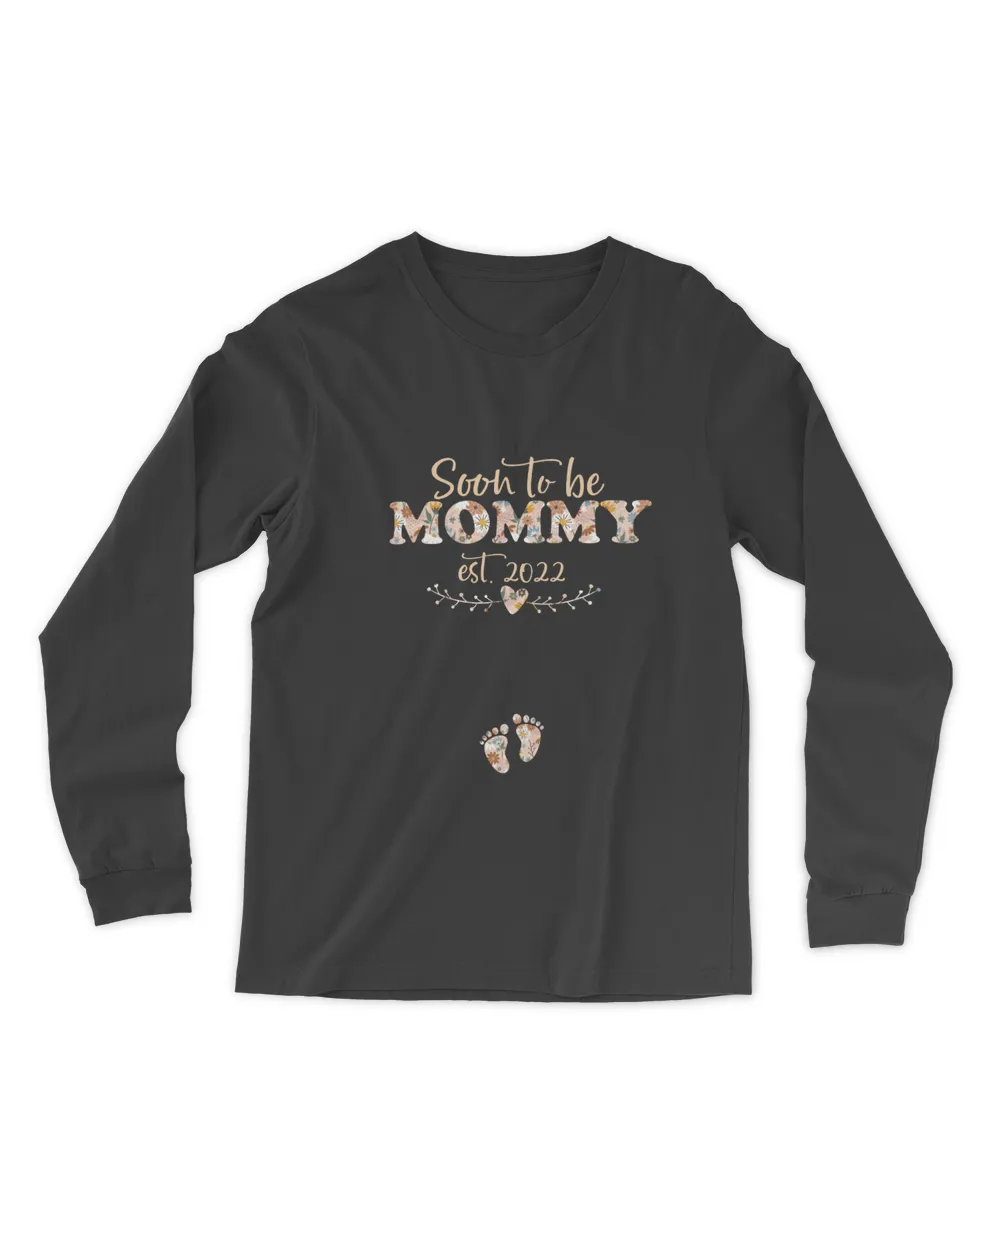 RD Promoted to Mommy Est 2022, Soon To Be Mommy Est 2022 Shirt, Baby Announcement, Pregnancy Announcement Shirt, Mommy To Be Shirt, Mom Shirt